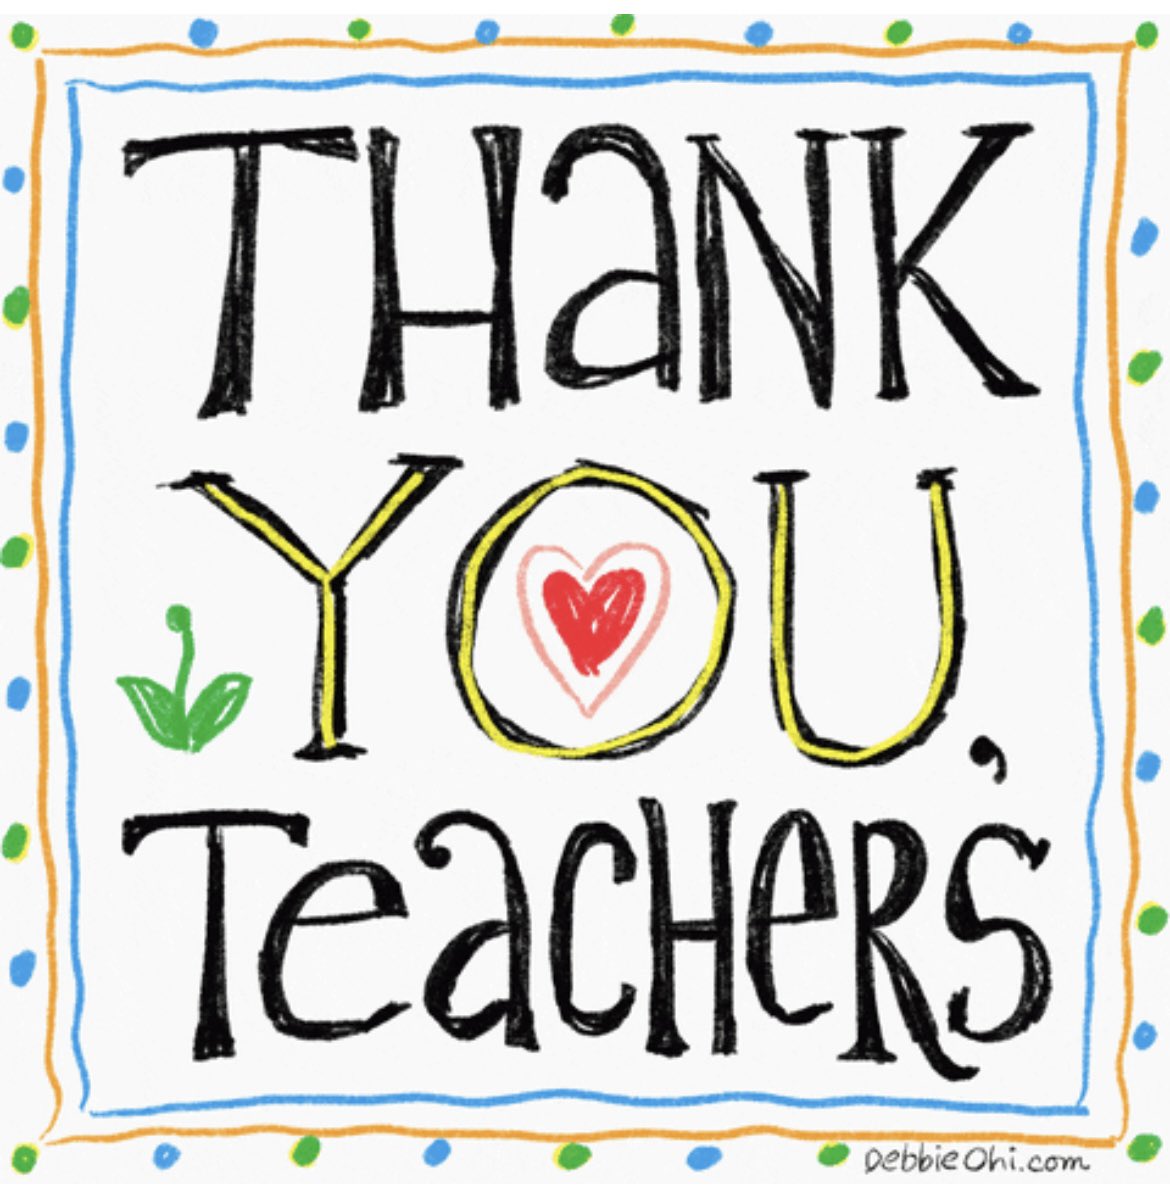 Happy Teacher Appreciation Week to all of our amazing teachers! Your hard work and dedication do not go unnoticed. Thank you for making a positive impact on students' lives. We are grateful for all you do!